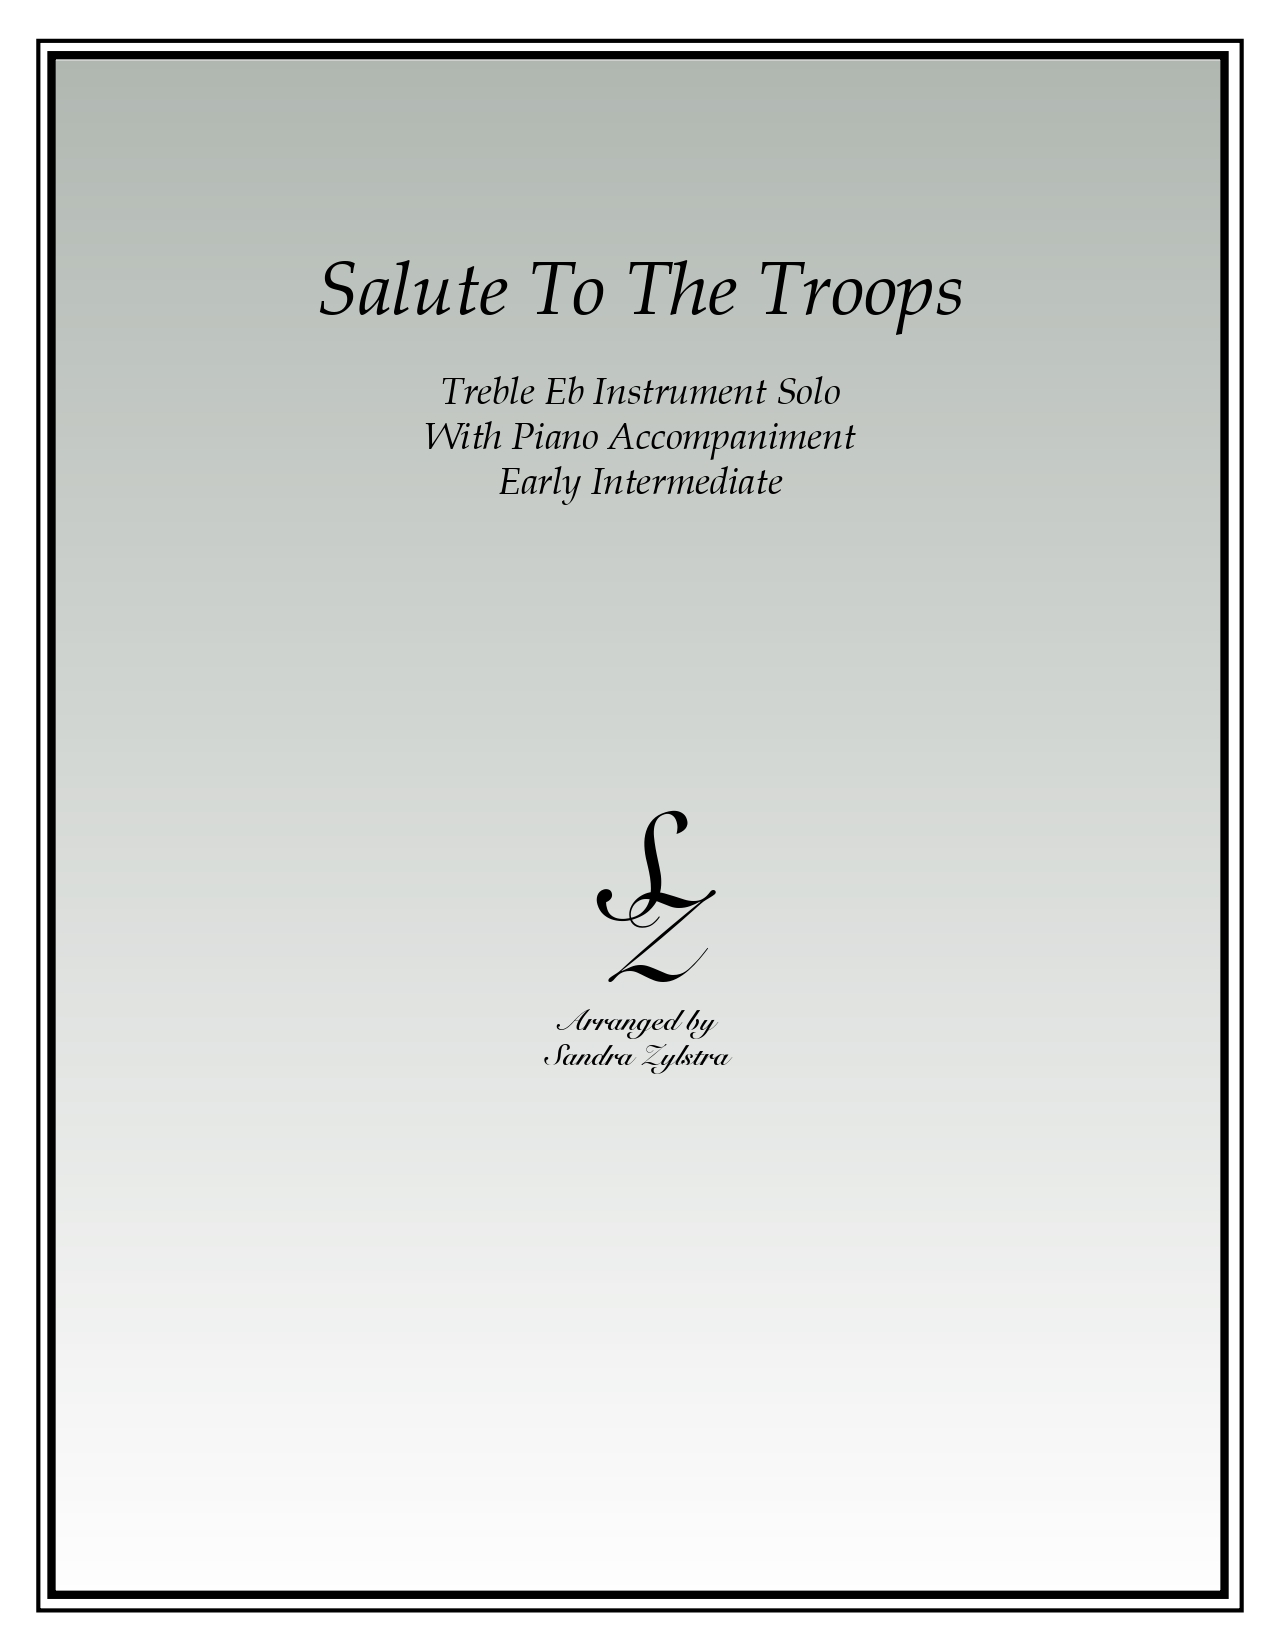 Salute To The Troops Eb instrument solo parts cover page 00011